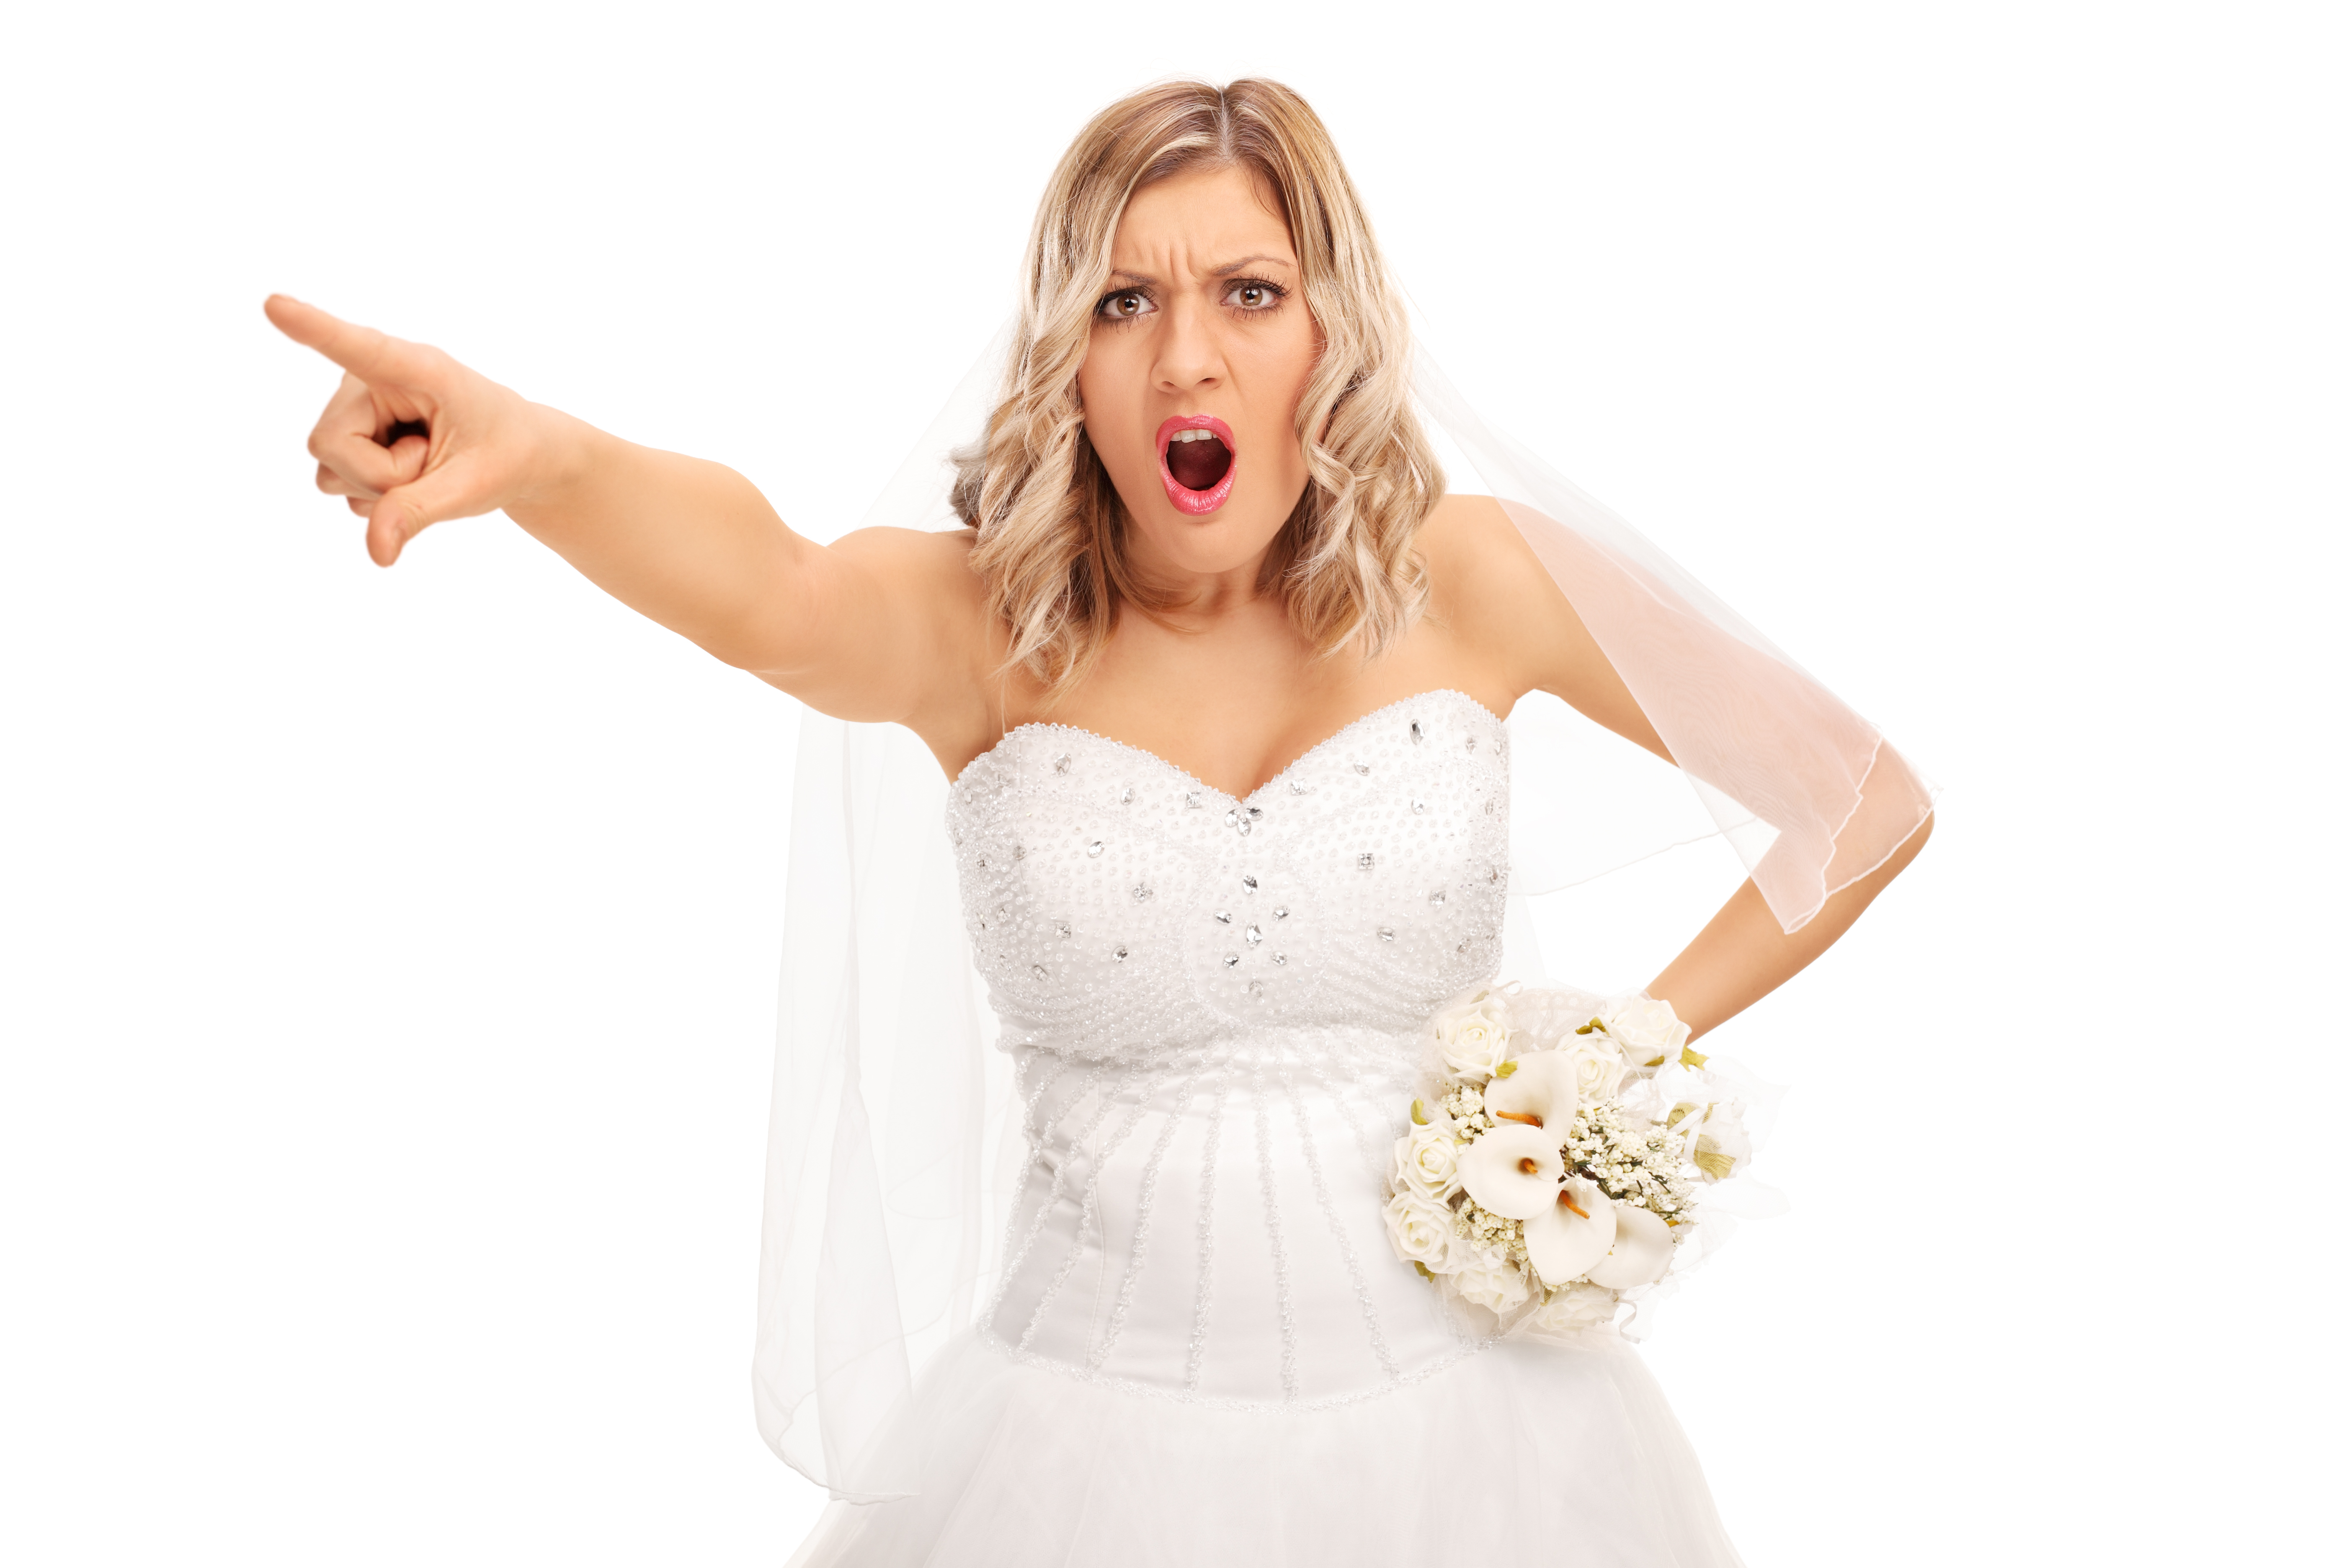 An angry bride pointing and yelling | Source: Shutterstock